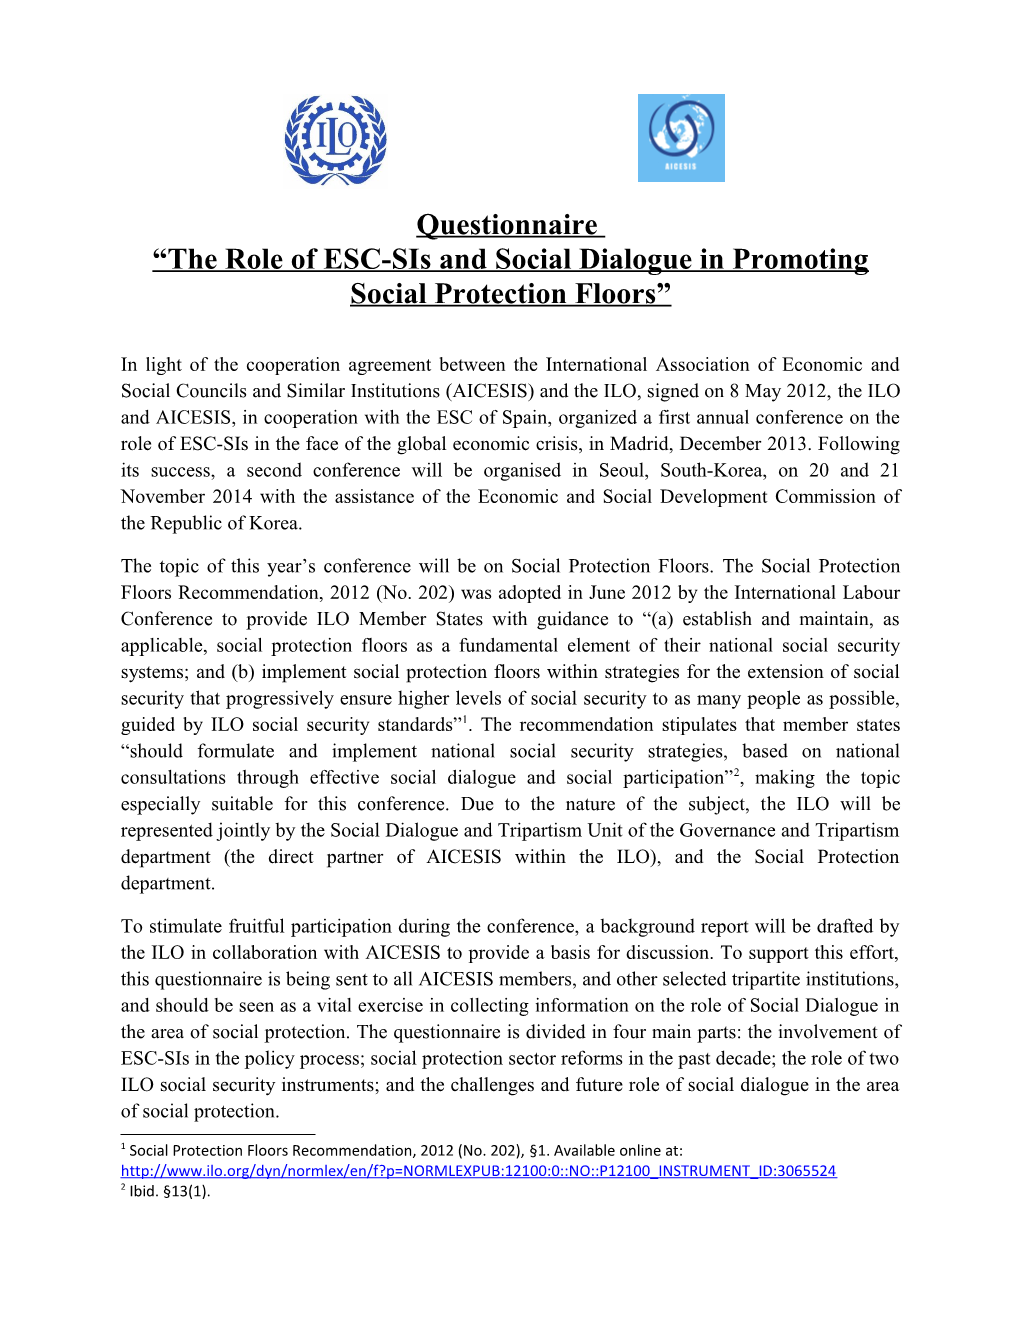 The Role of ESC-Sis and Social Dialogue in Promoting Social Protection Floors